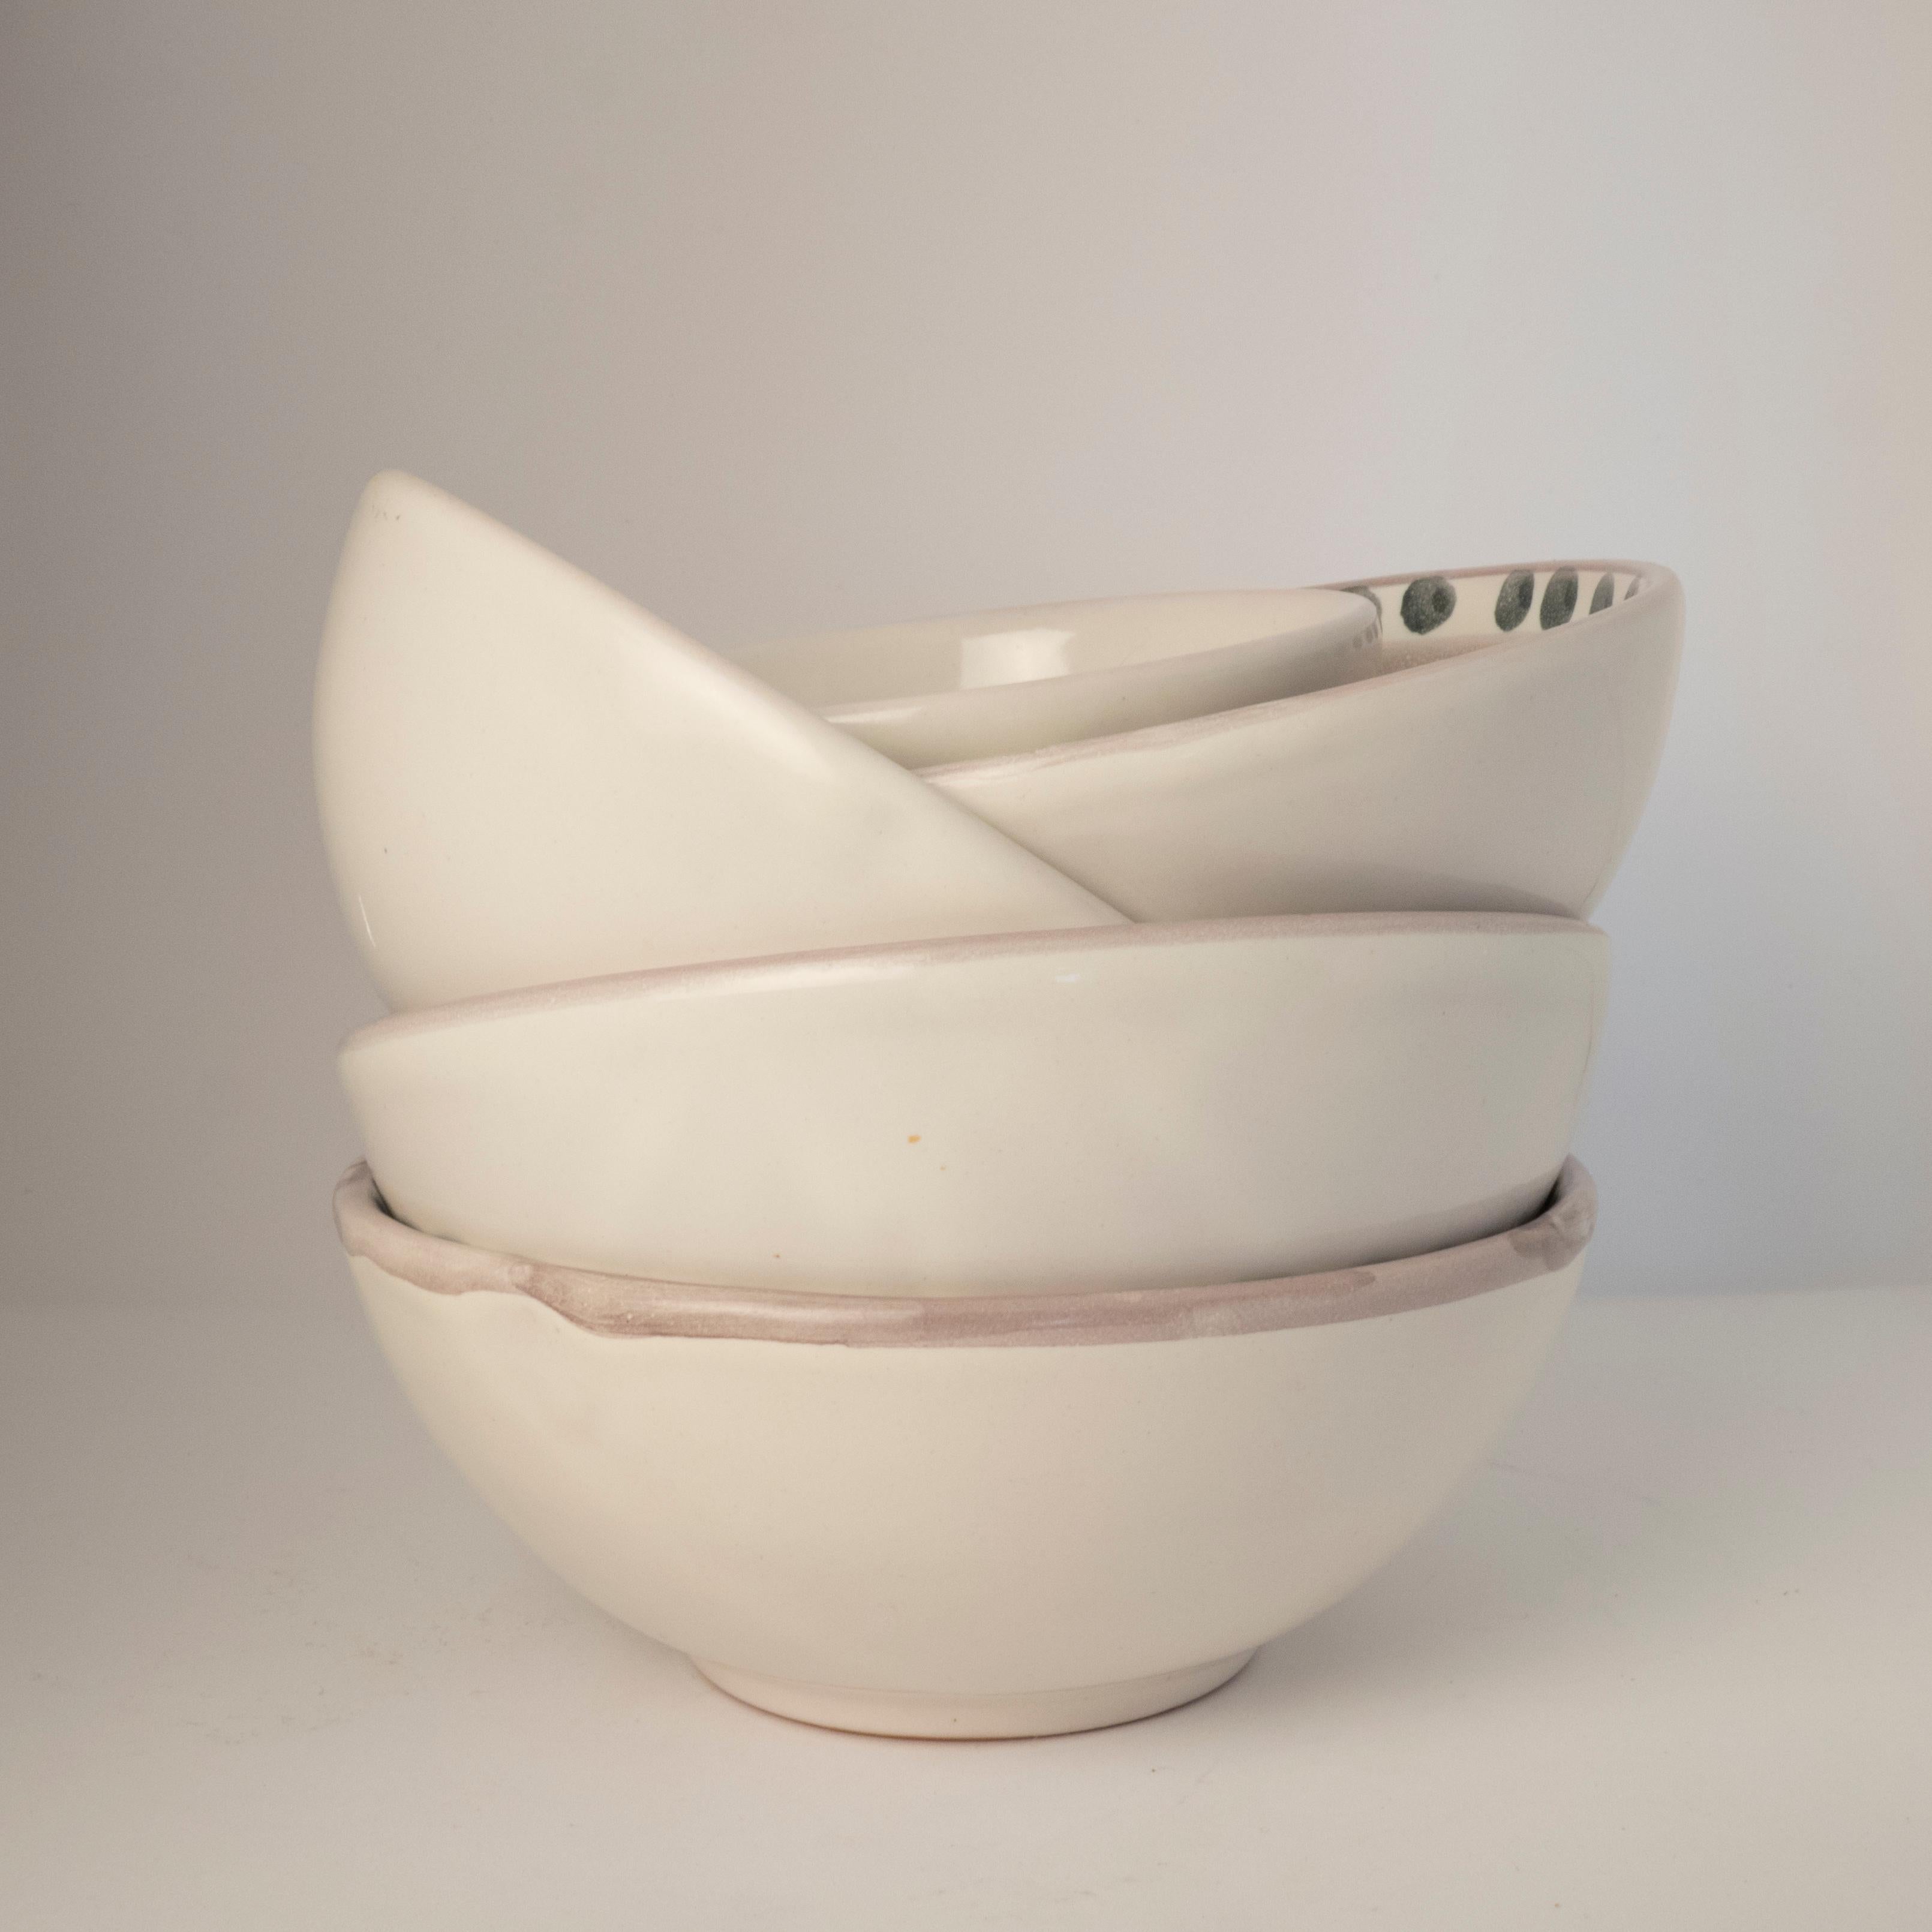 Contemporary 21st Century Vietri Ceramic Bowl in Purple and White Made in Italy Hand painted  For Sale